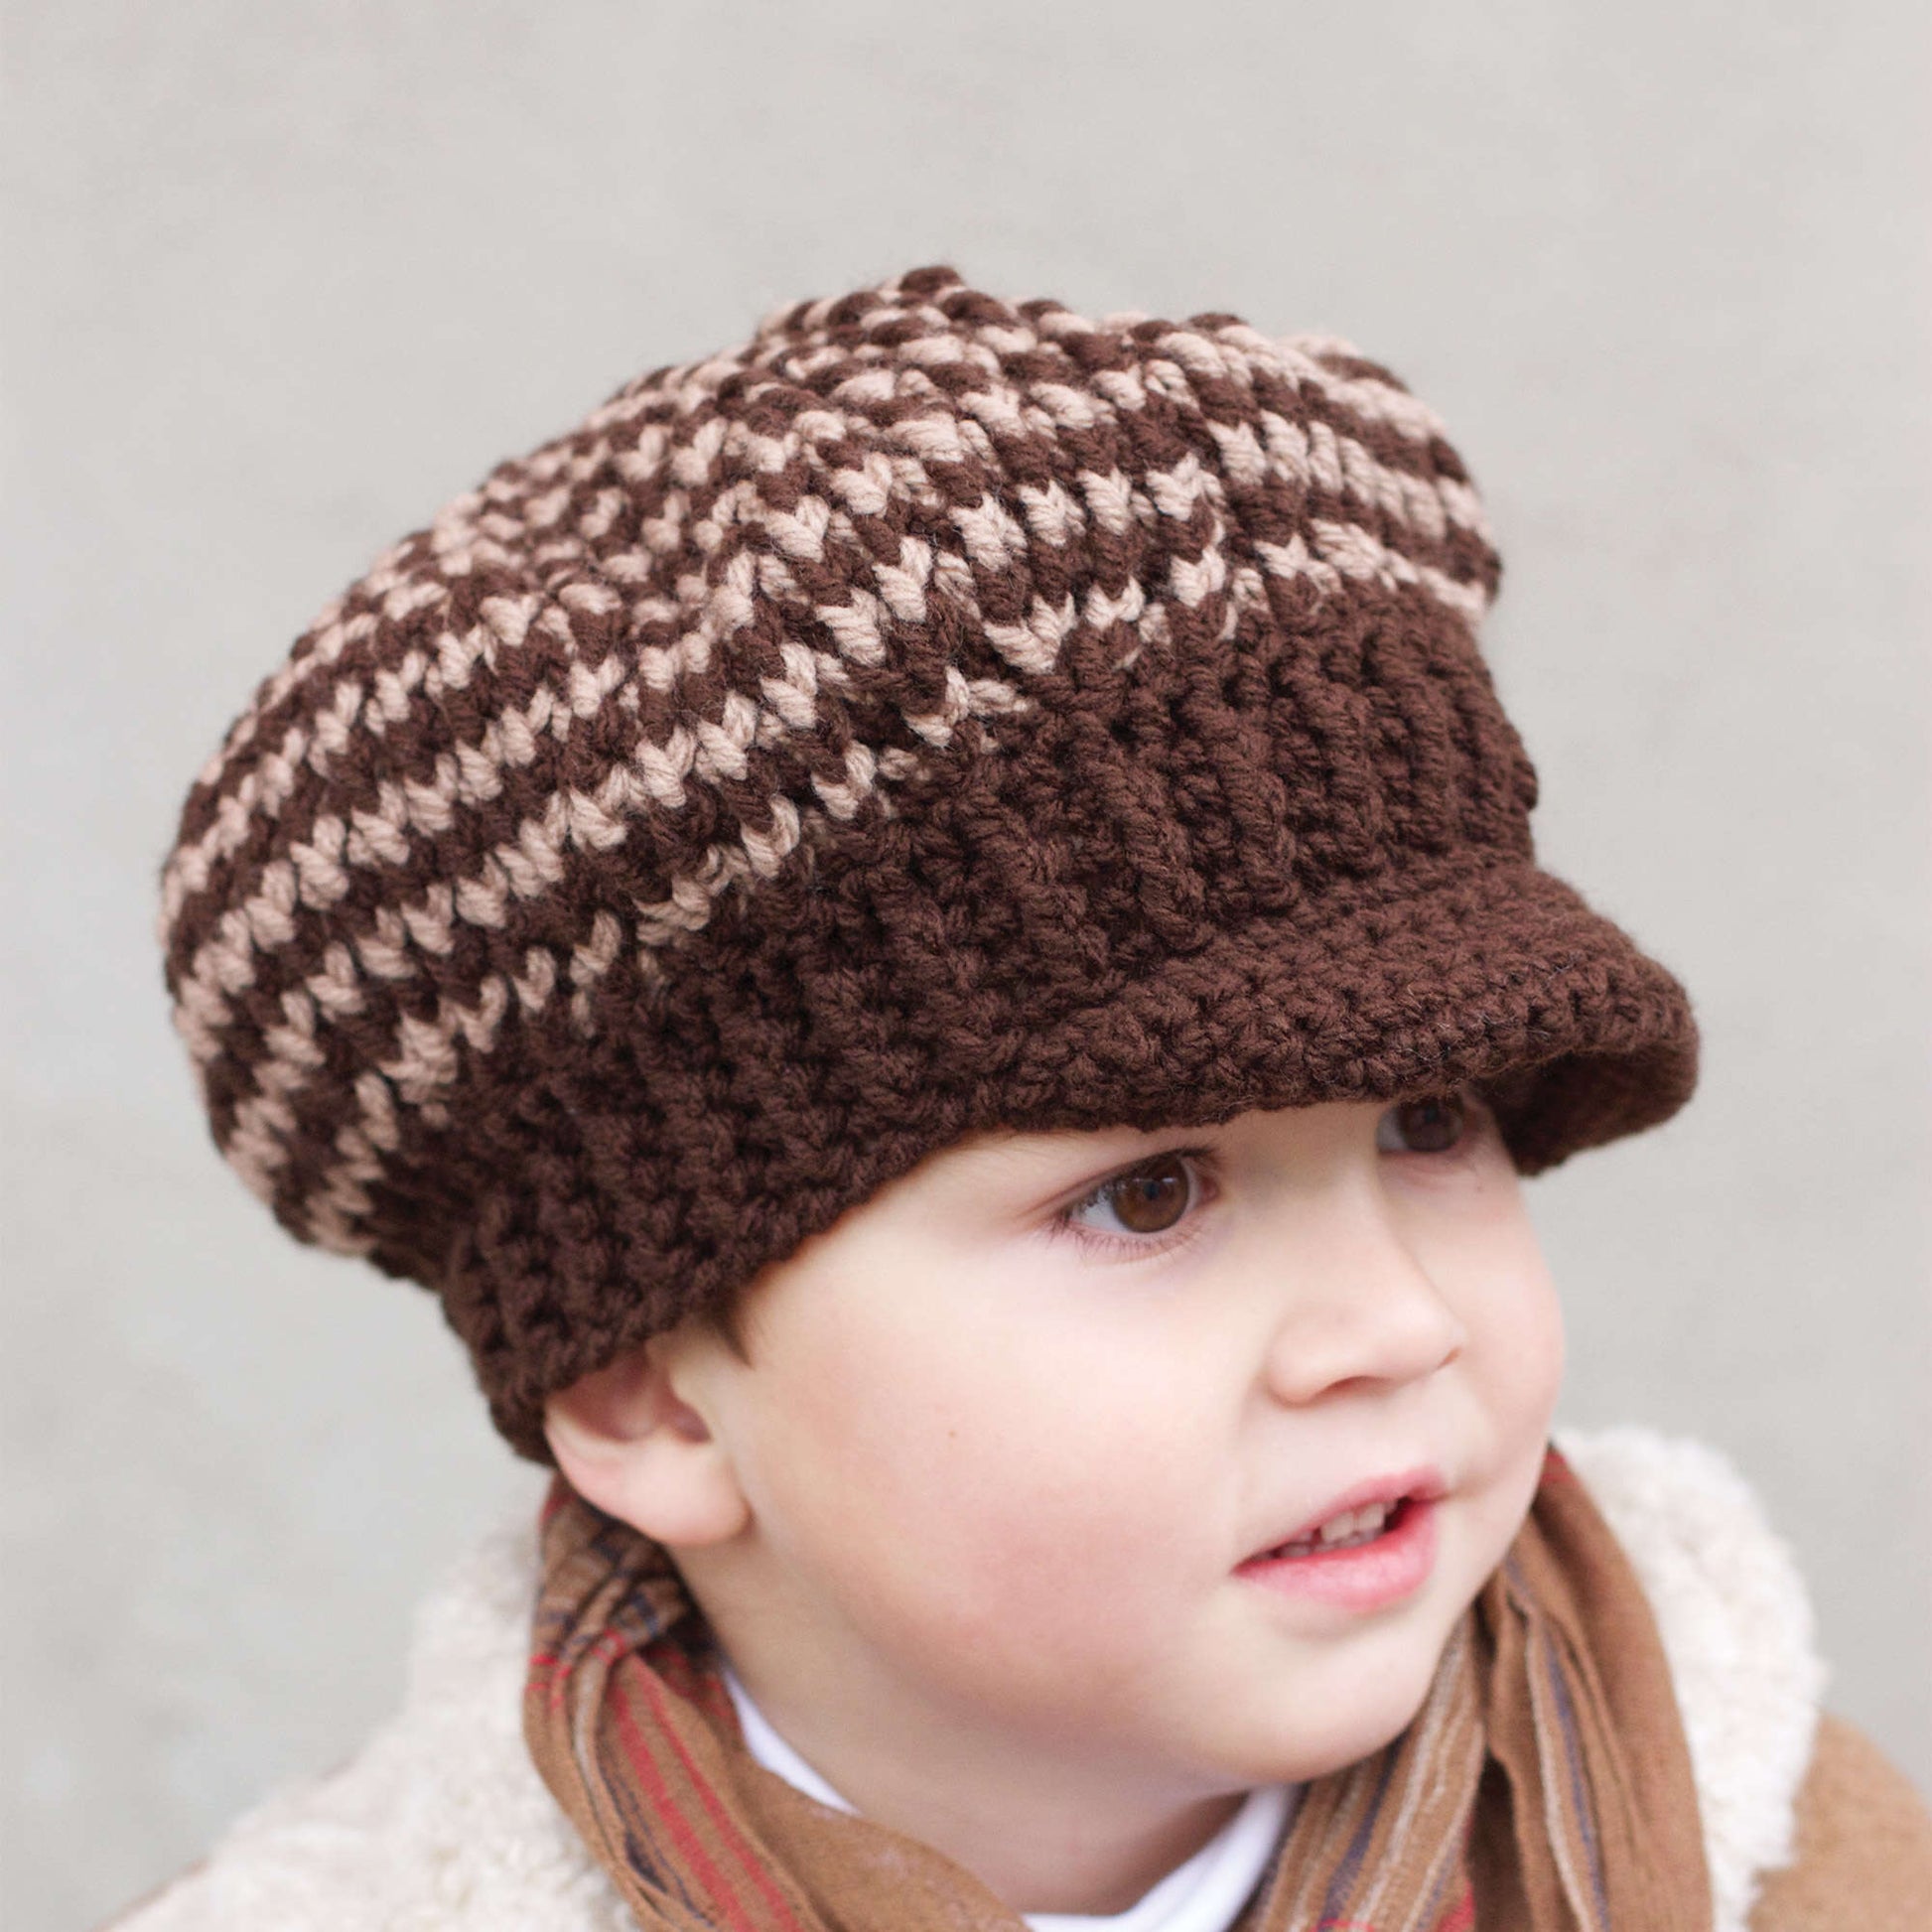 Free Patons Newsboy's and Girl's Caps Crochet Pattern